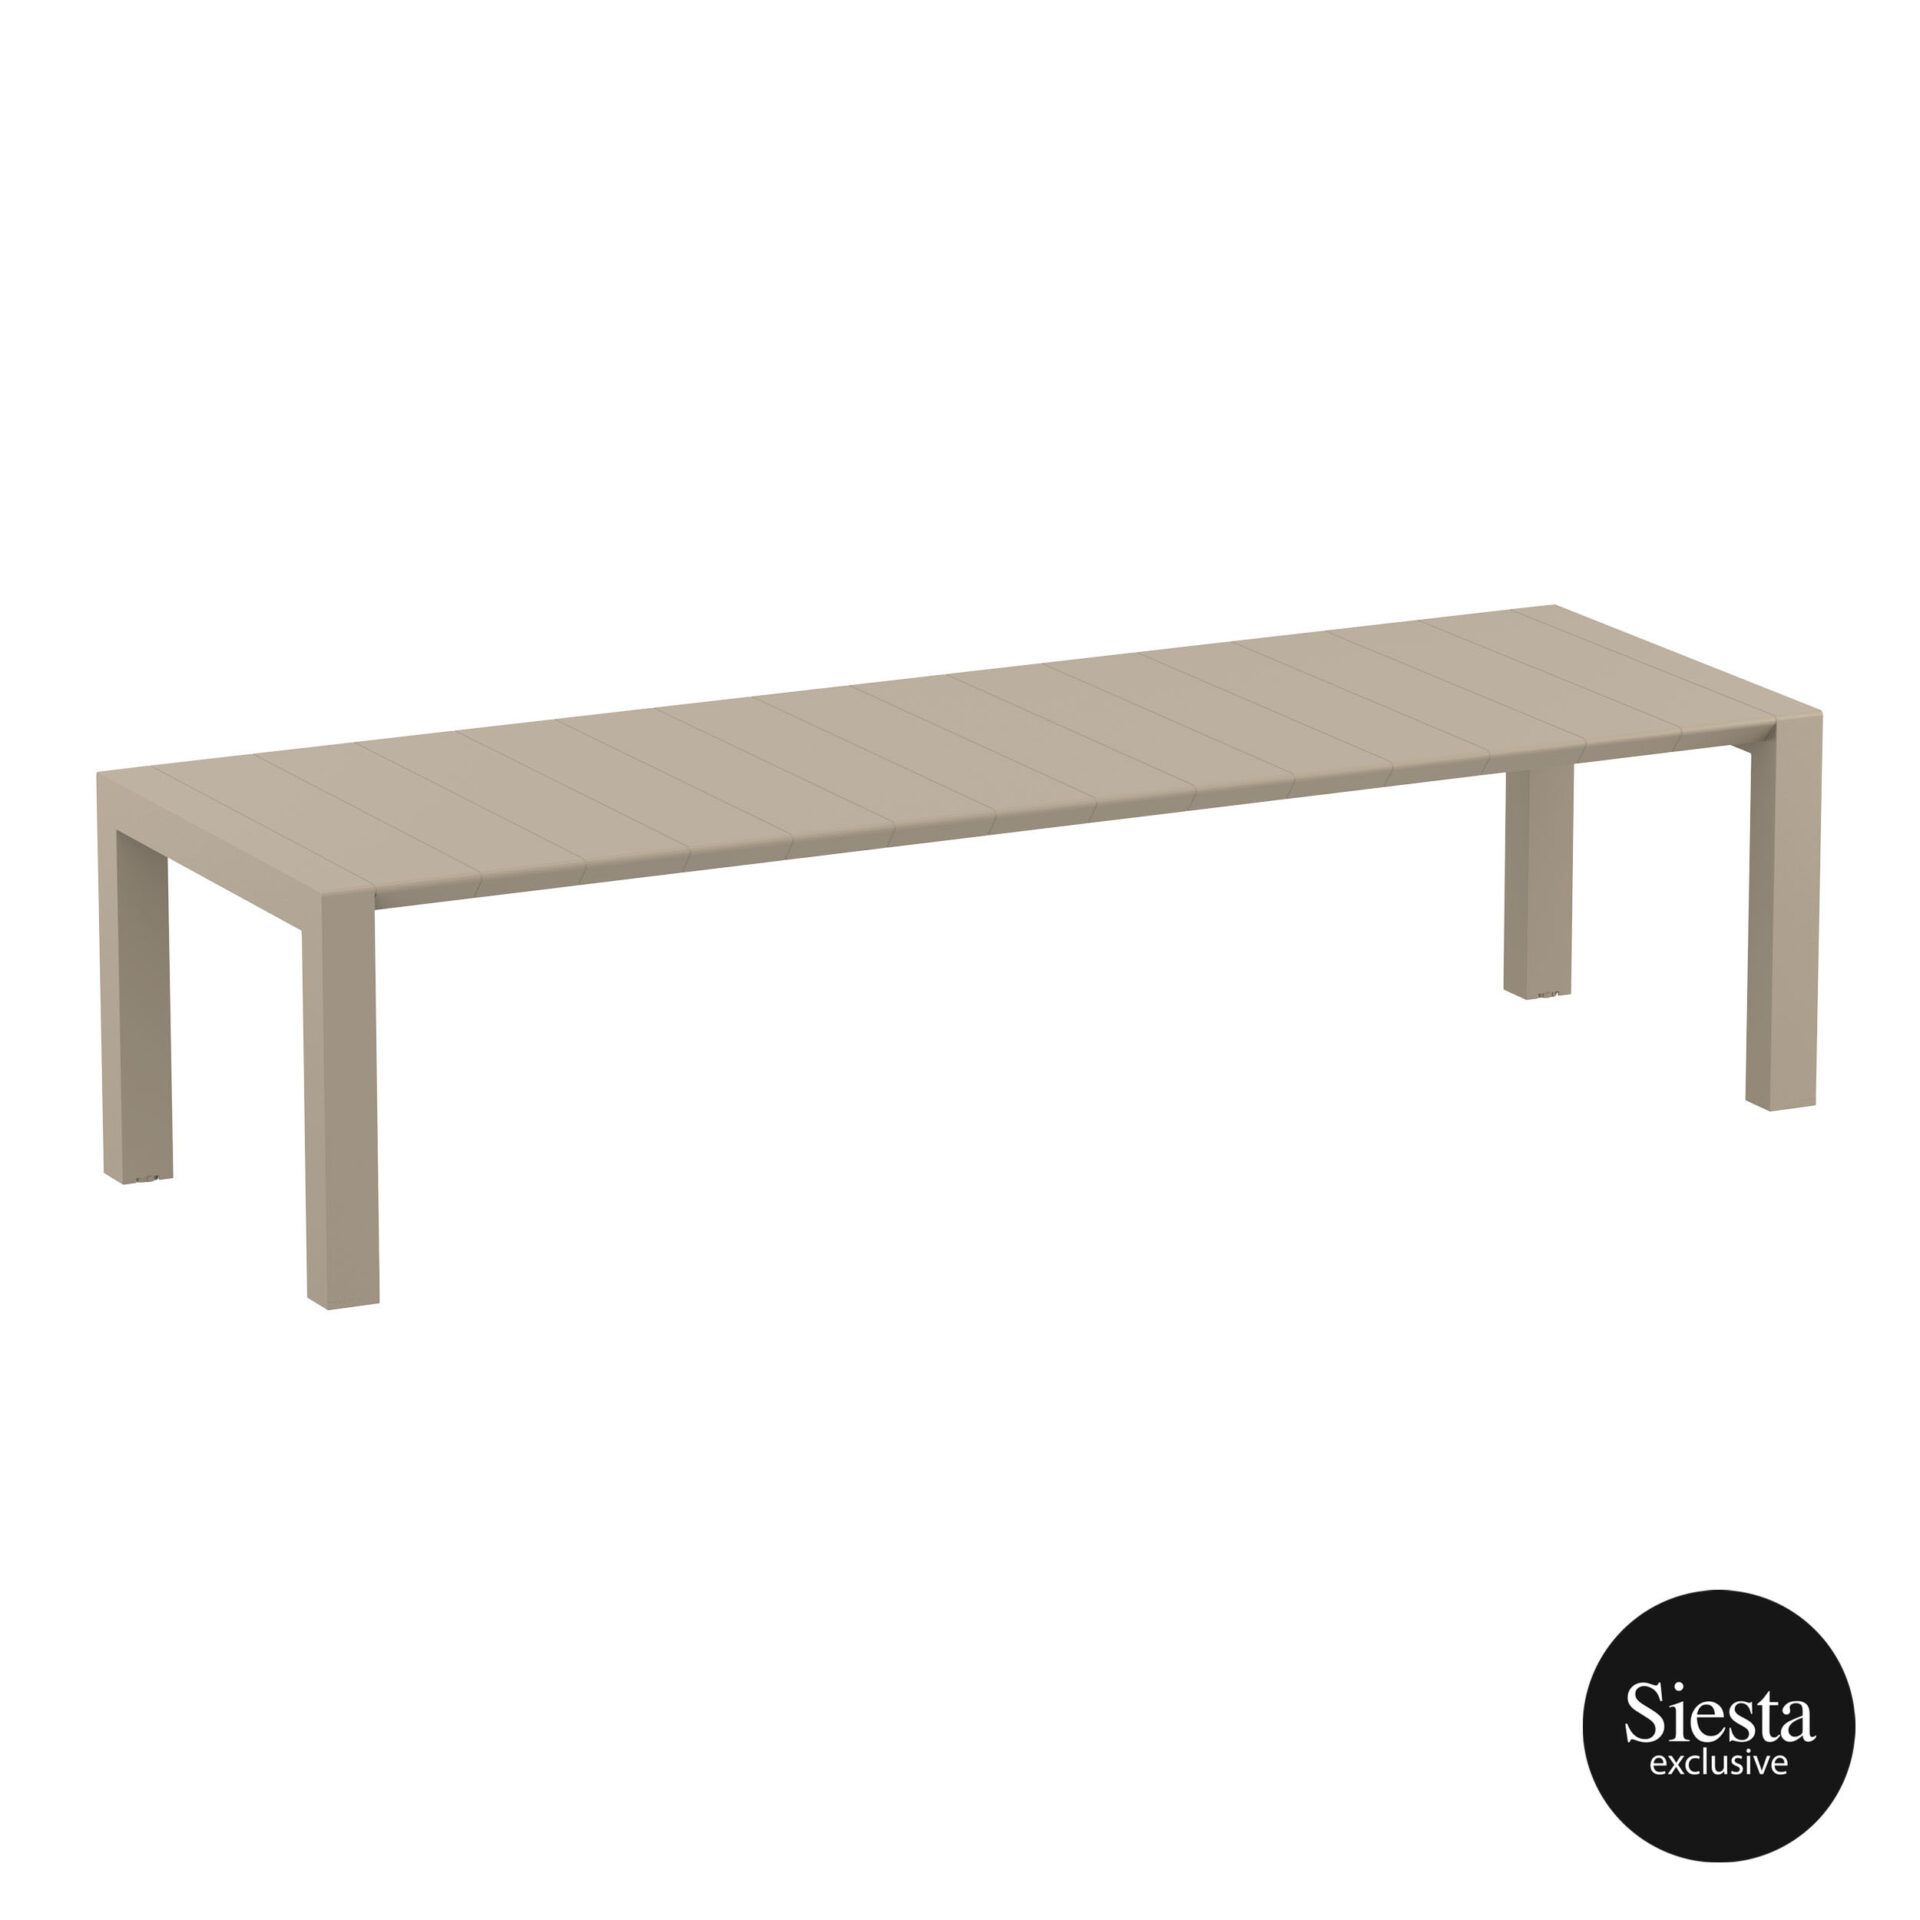 010 vegas table xl 300 taupe front side